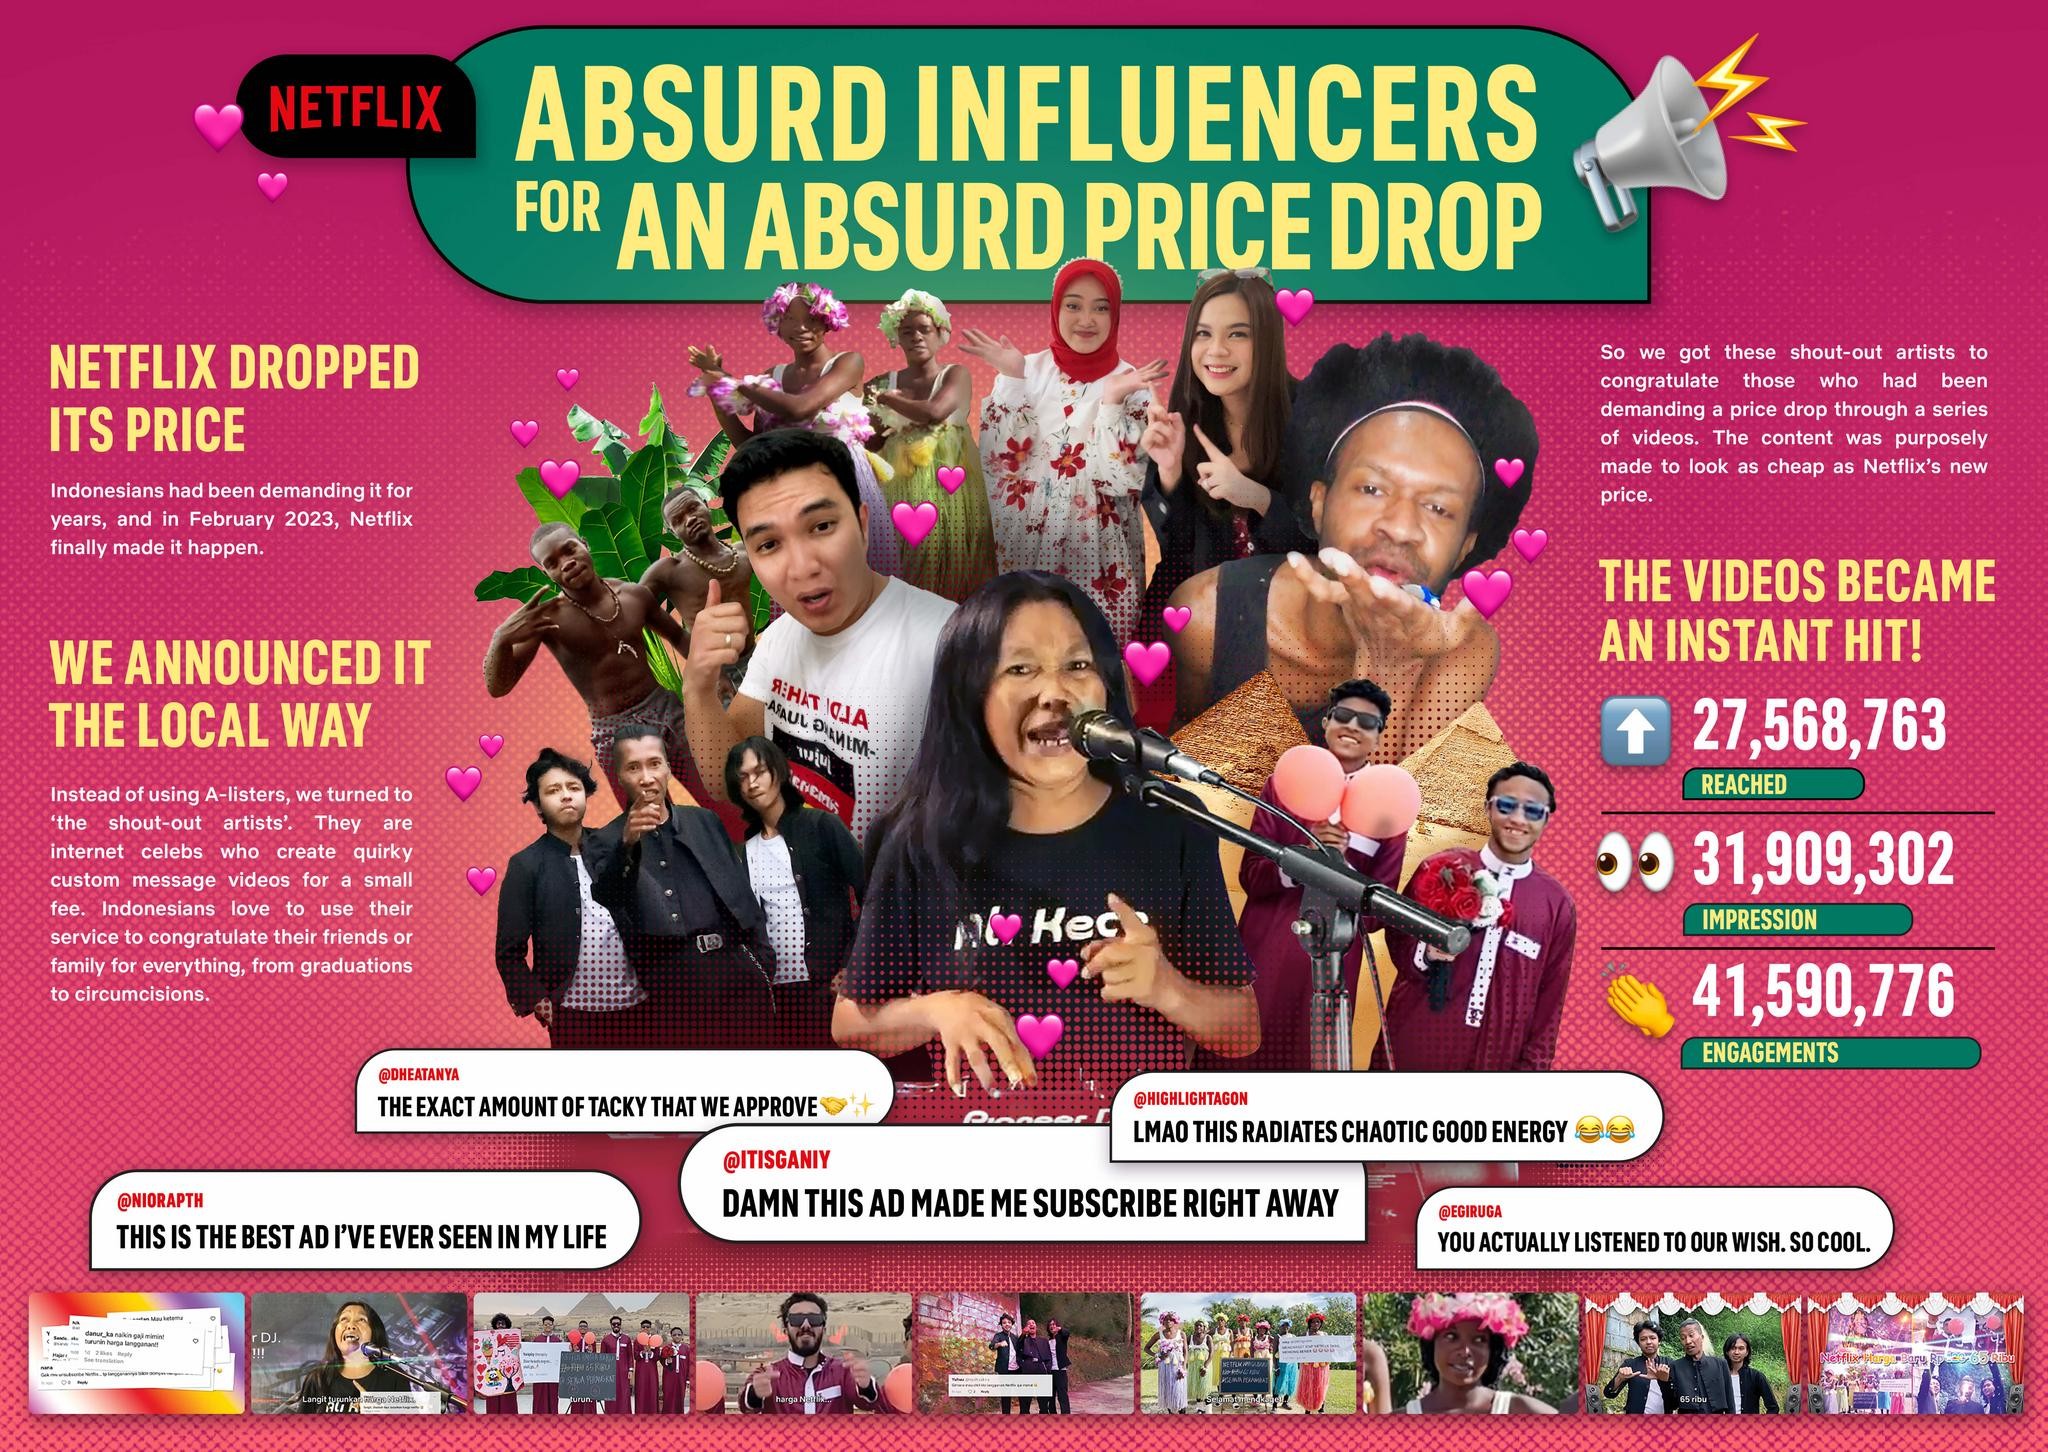 THE ABSURD PRICE DROP'S INFLUENCERS